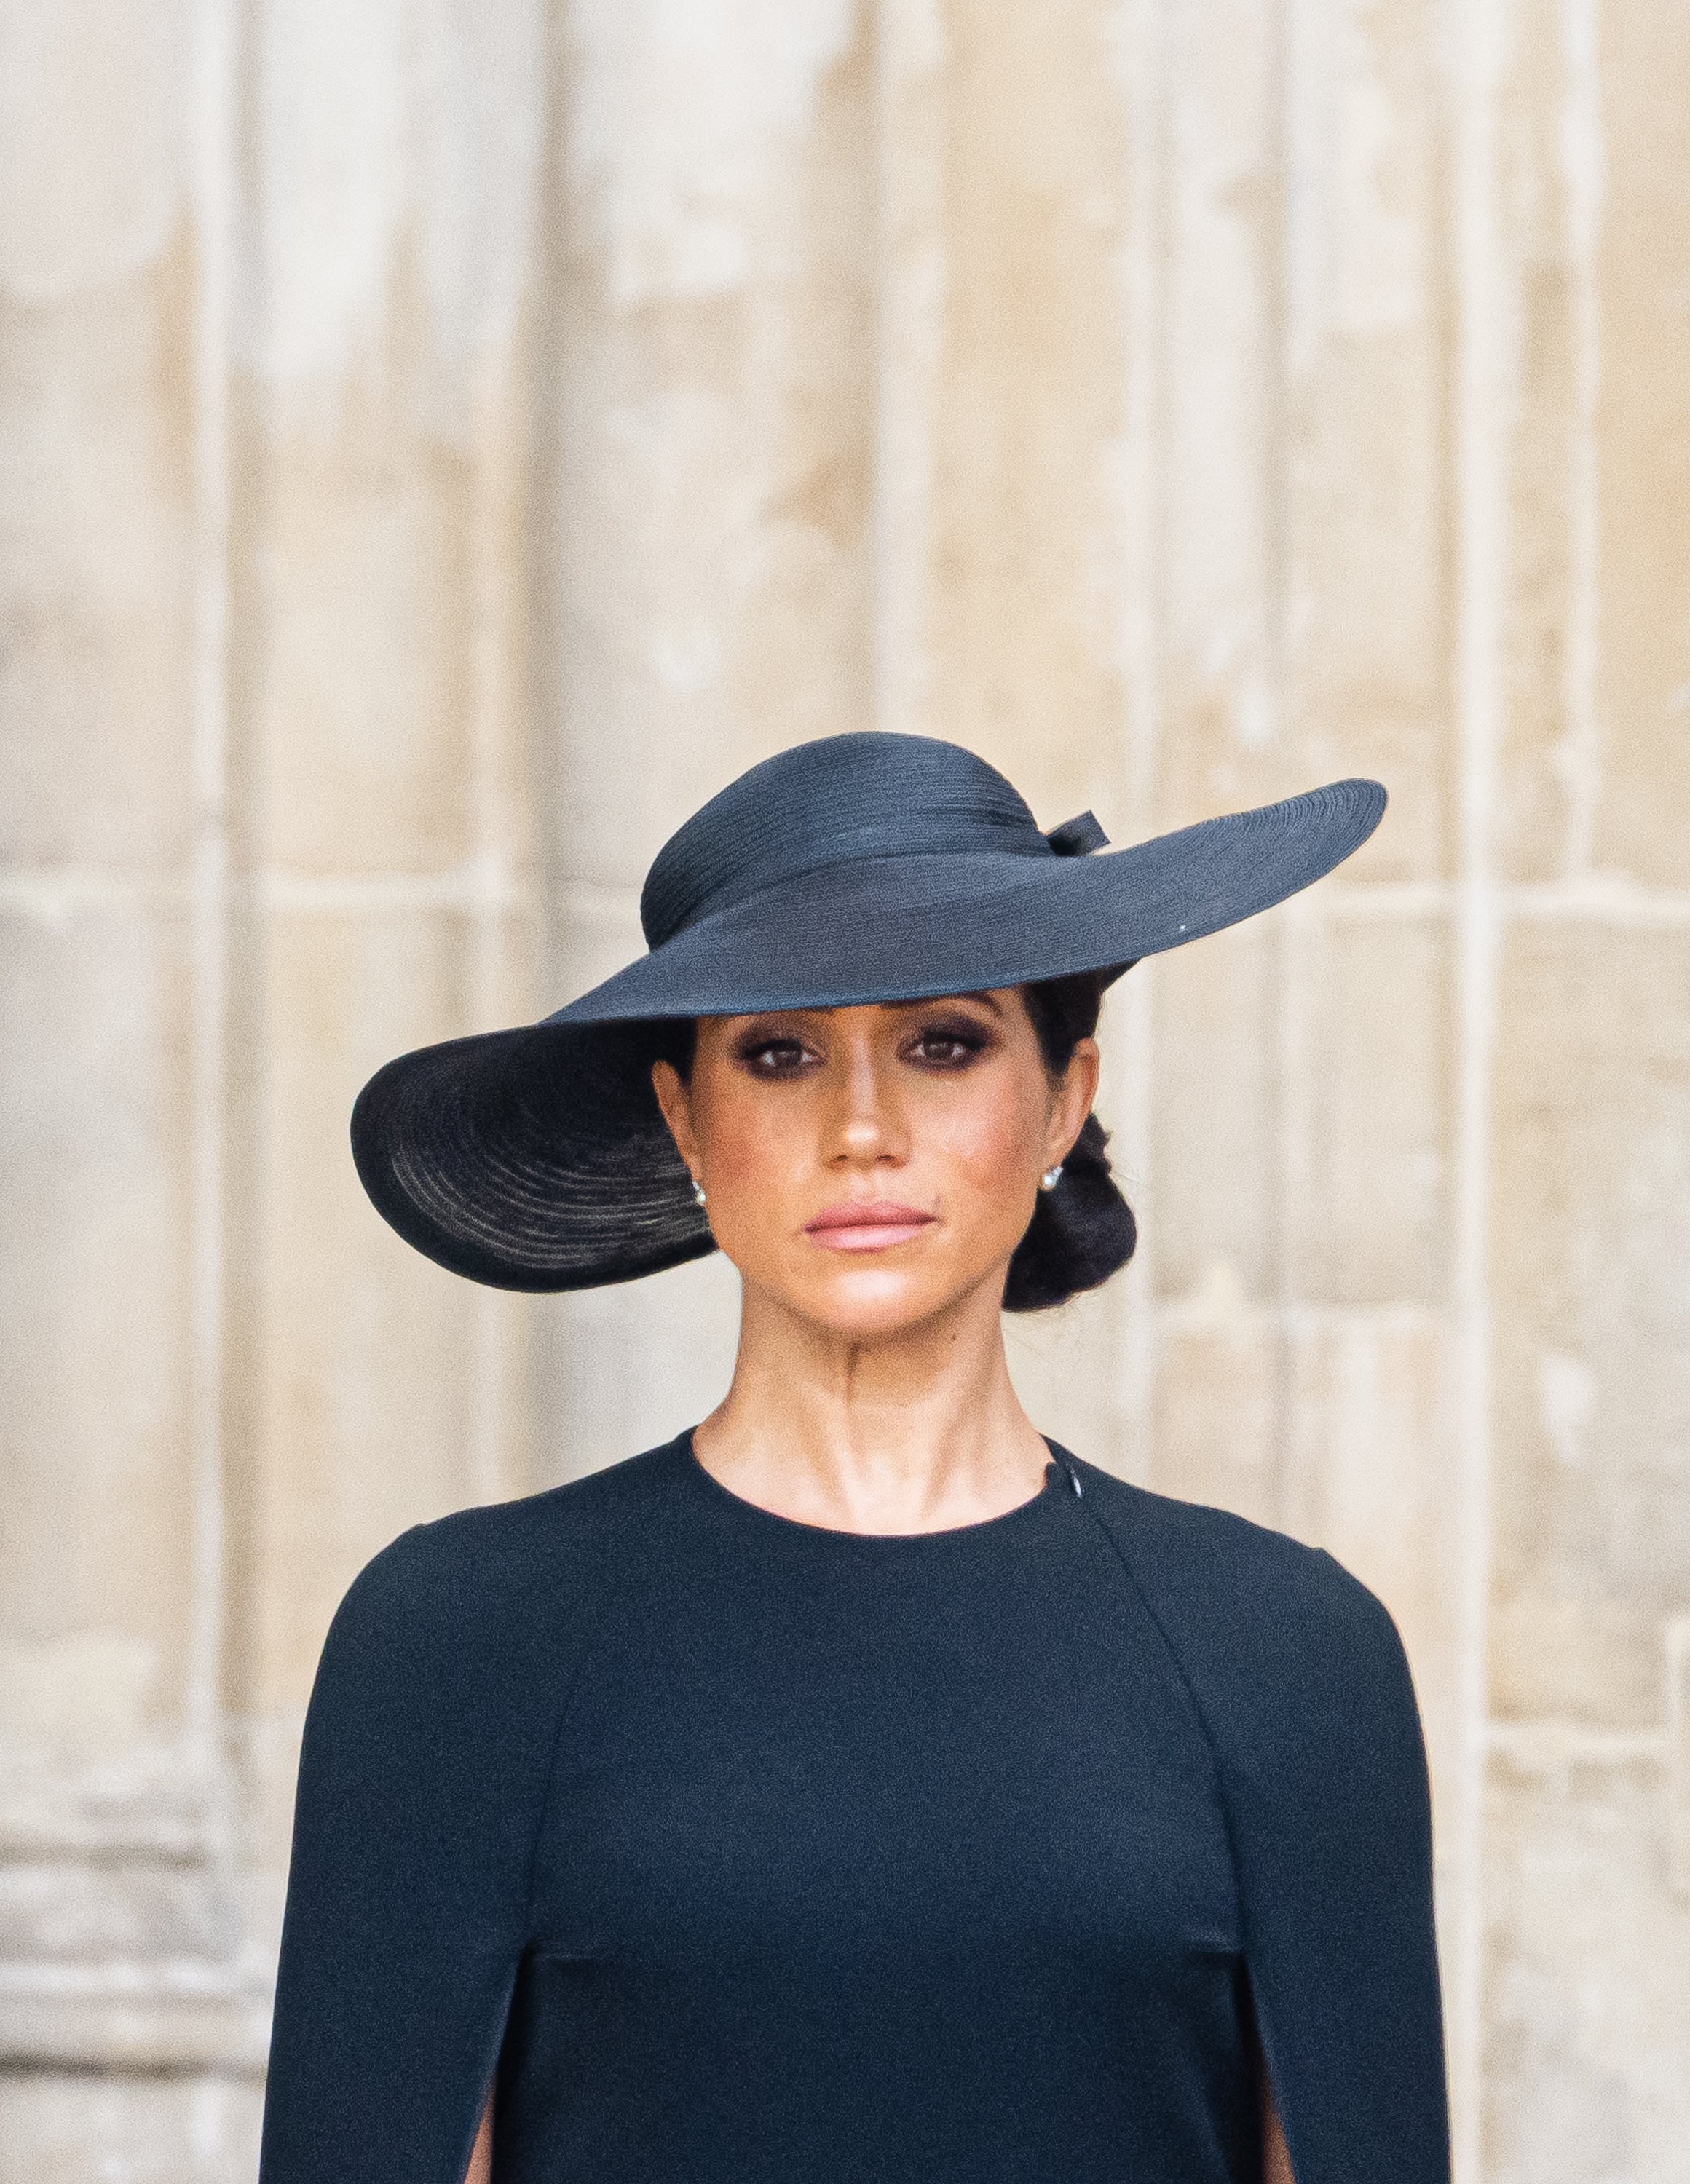 Meghan, Duchess of Sussexduring the State Funeral of Queen Elizabeth II at Westminster Abbey on September 19, 2022 in London, England | Source: Getty Images 